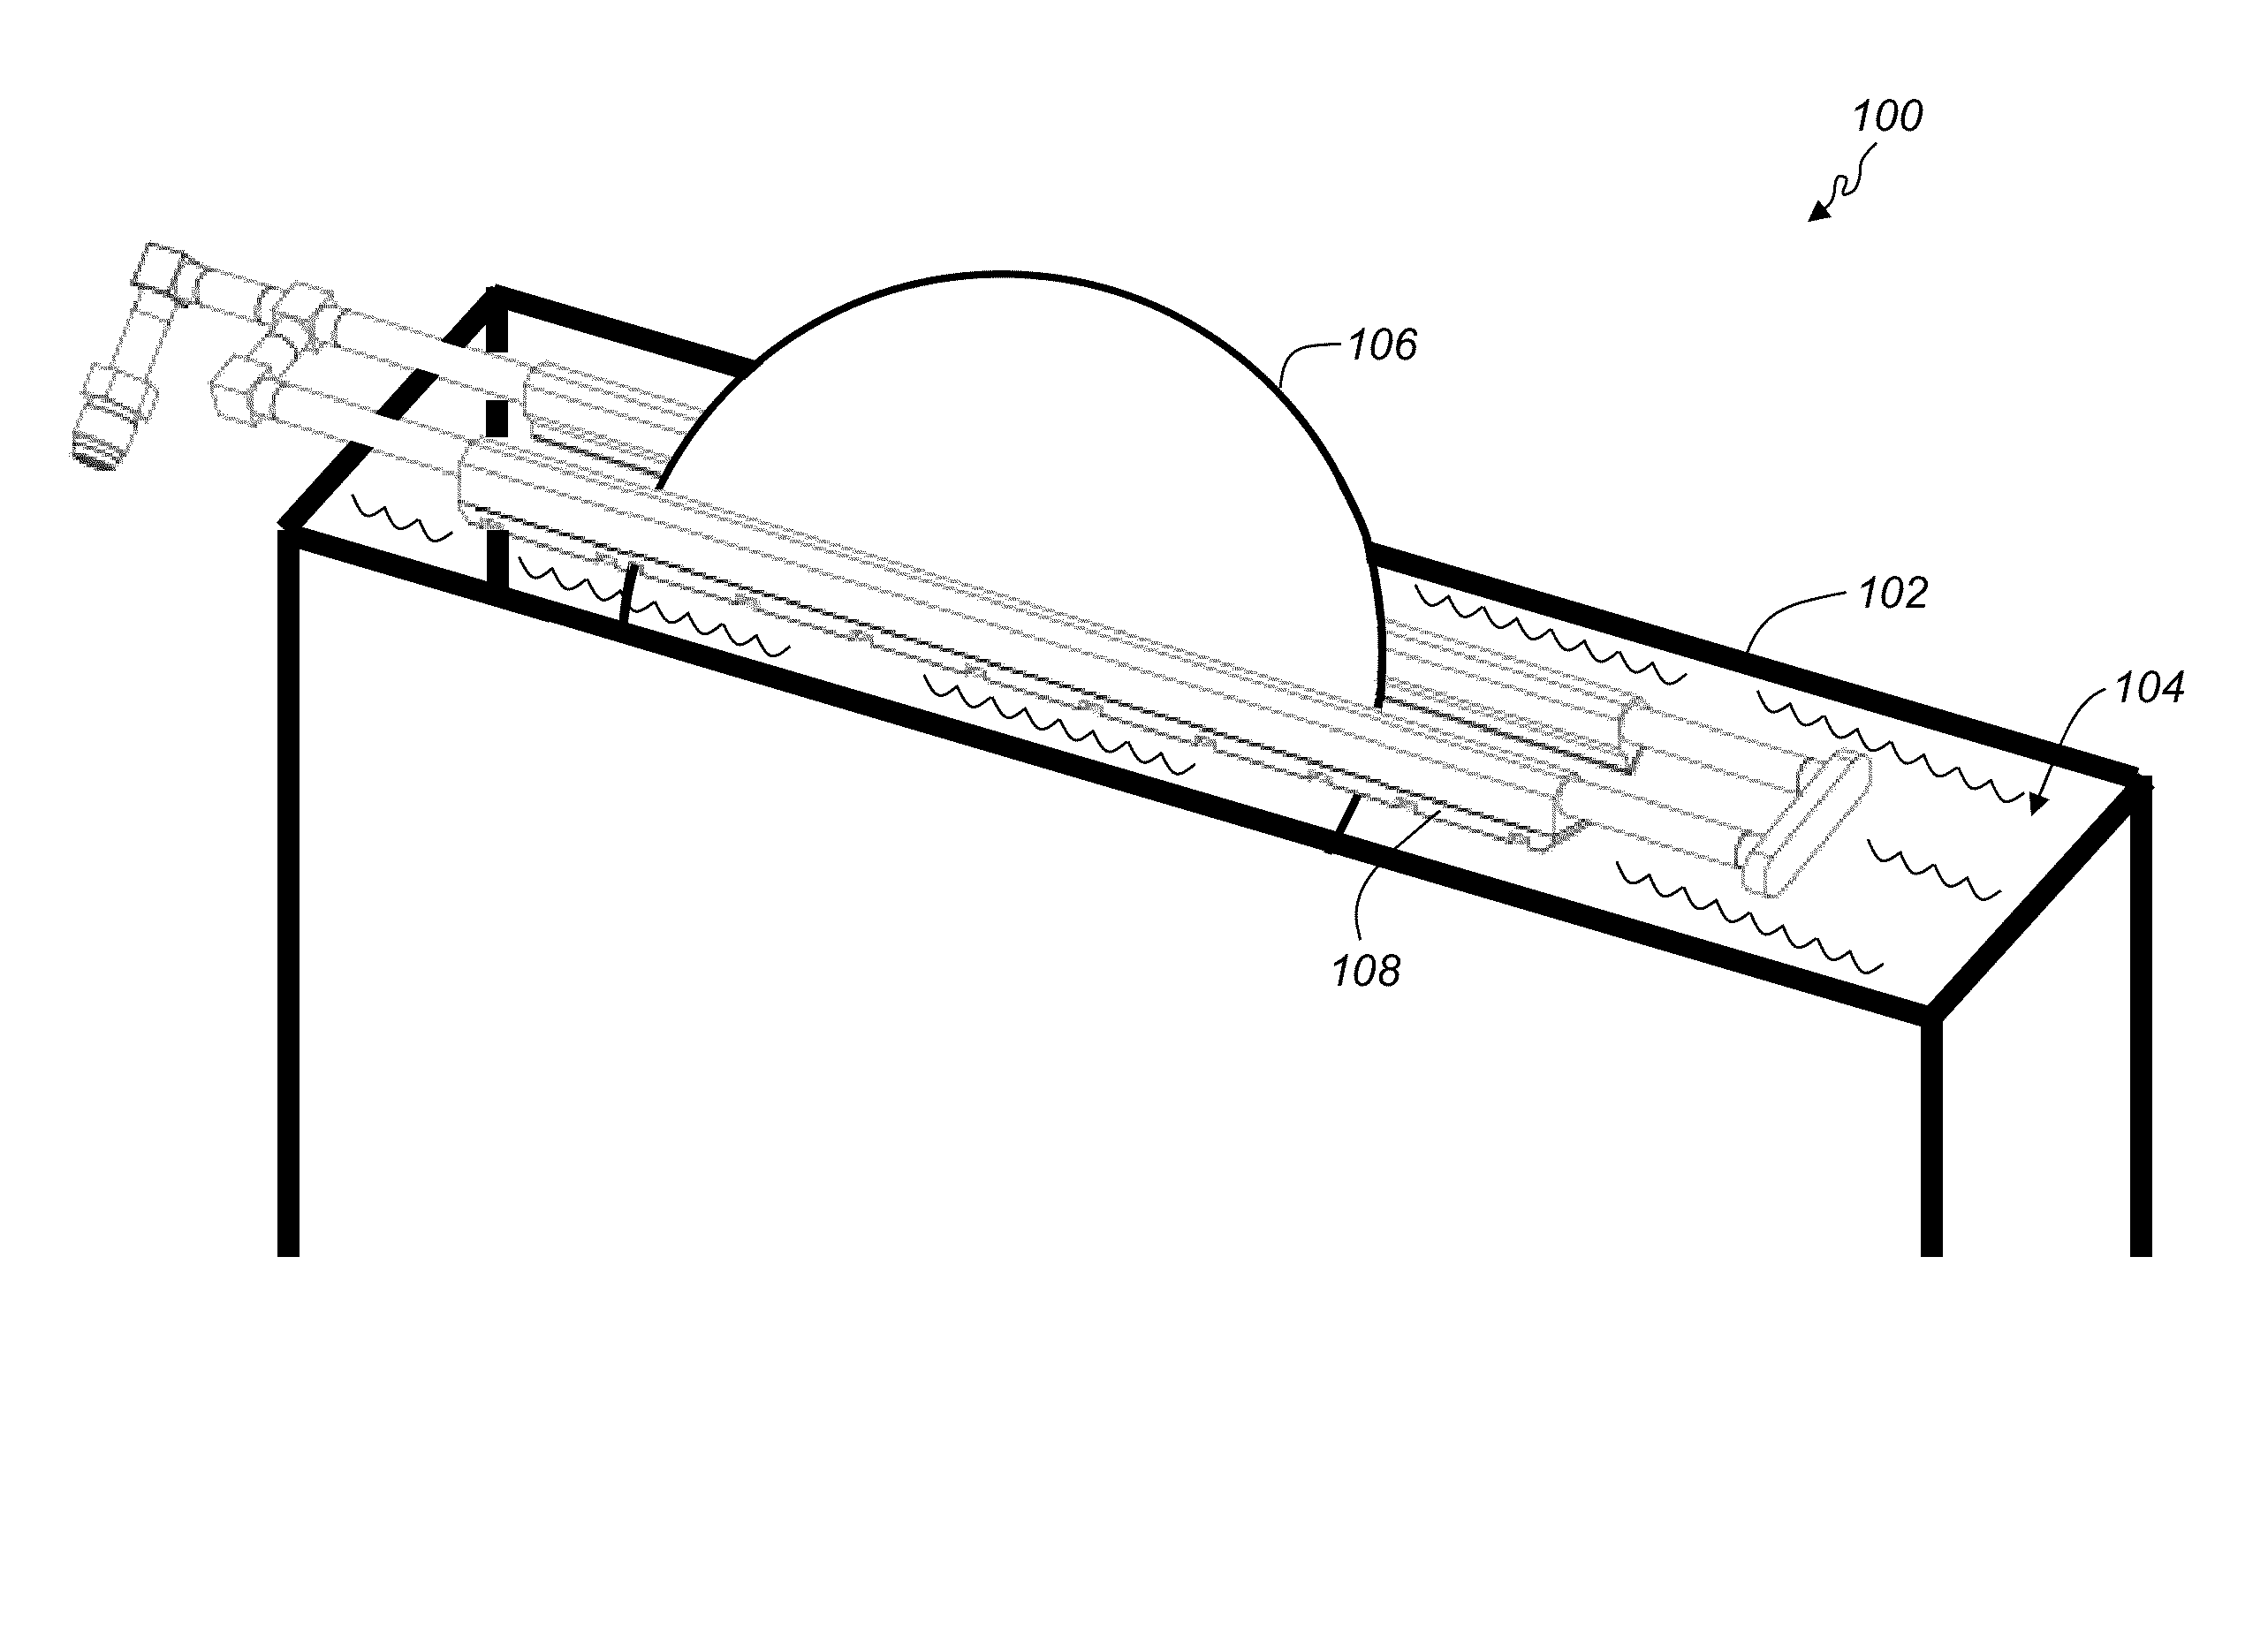 Methods and apparatus for marangoni substrate drying using a vapor knife manifold